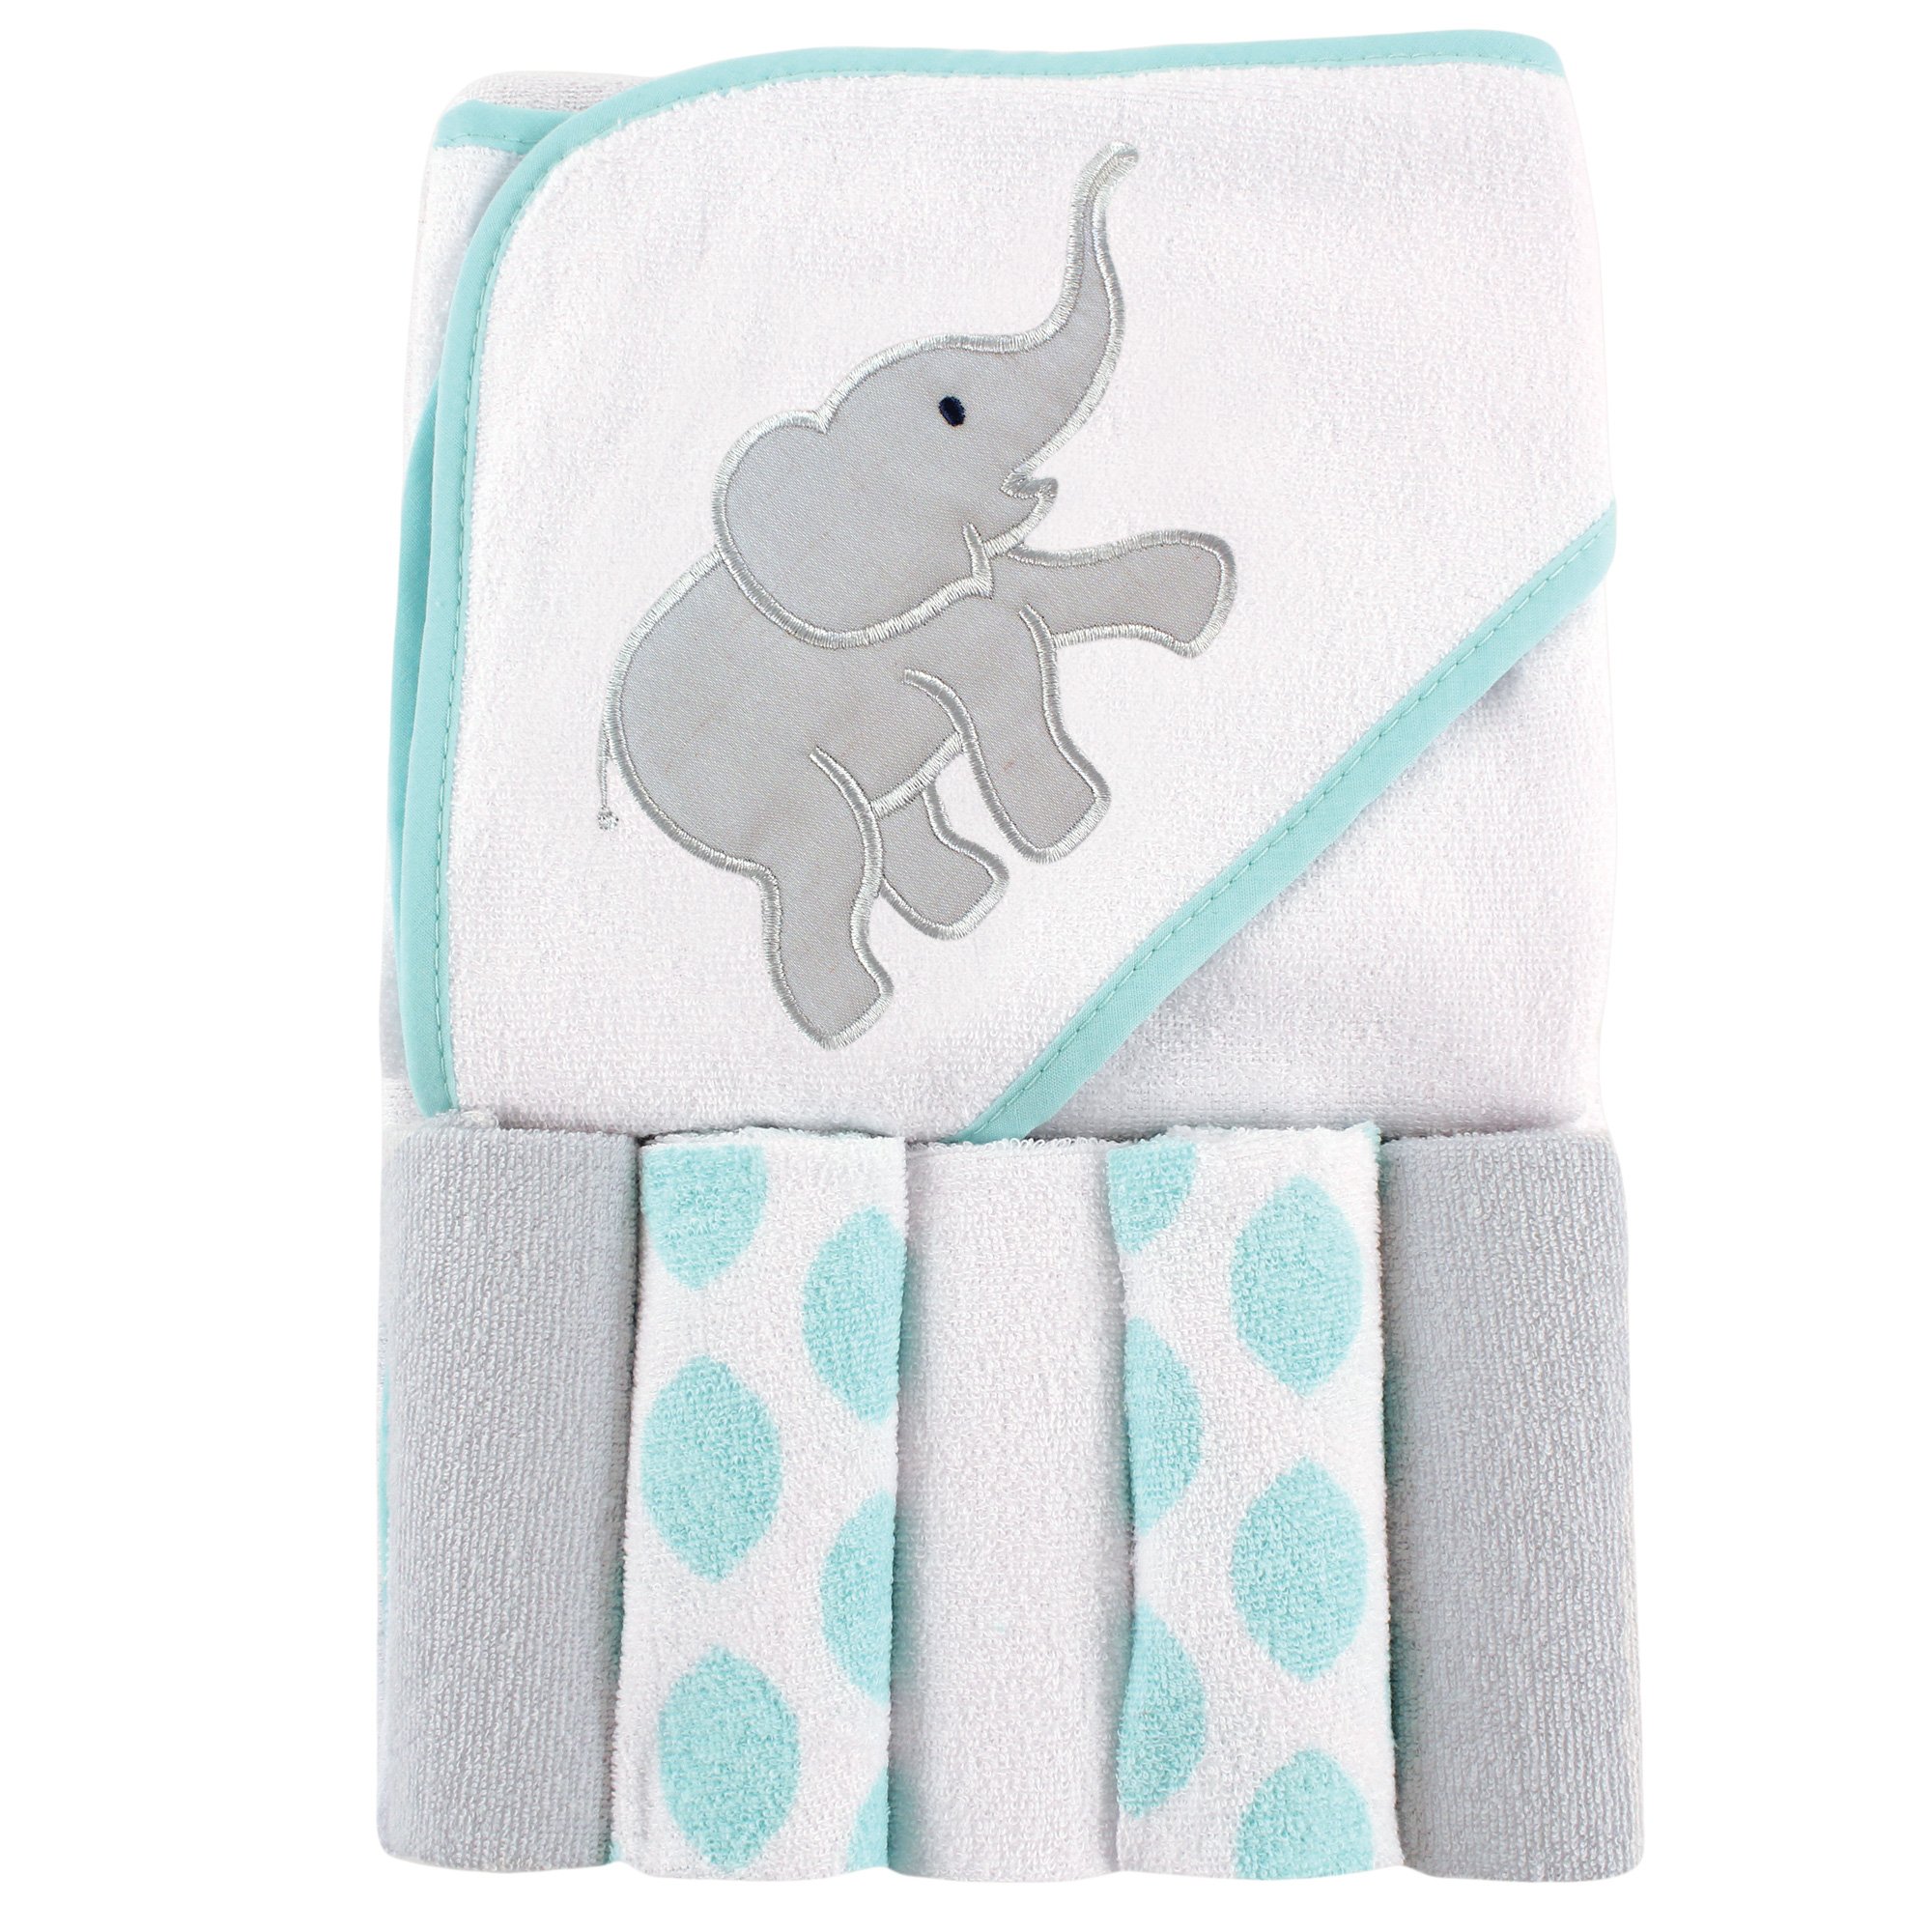 Luvable Friends Unisex Baby Hooded Towel with Five Washcloths, Cotton,Polyester,Ikat Elephant, One Size